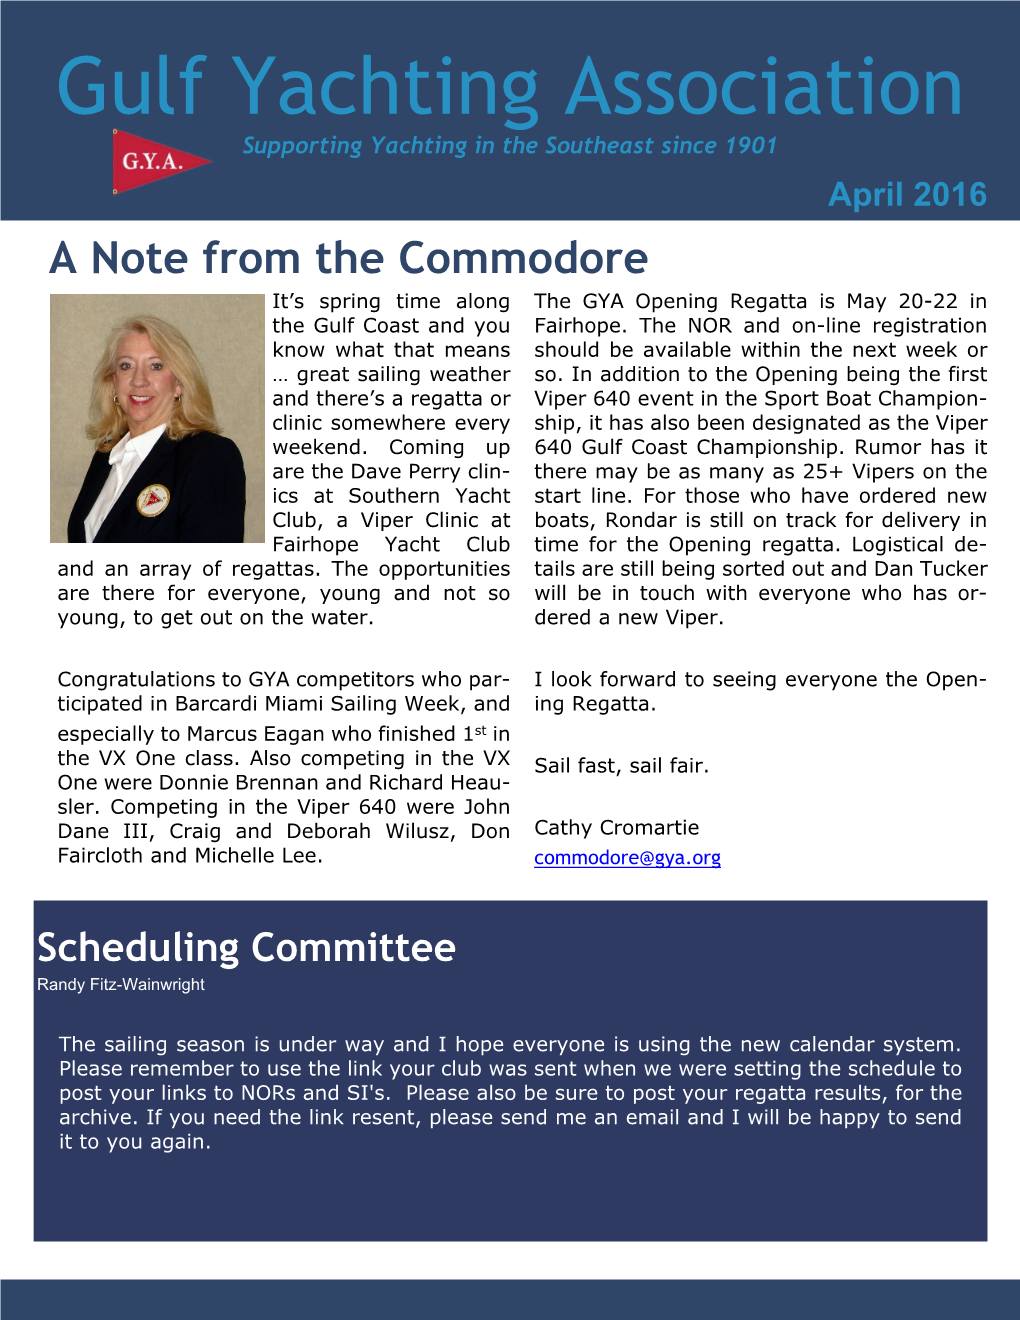 April 2016 a Note from the Commodore It’S Spring Time Along the GYA Opening Regatta Is May 20-22 in the Gulf Coast and You Fairhope